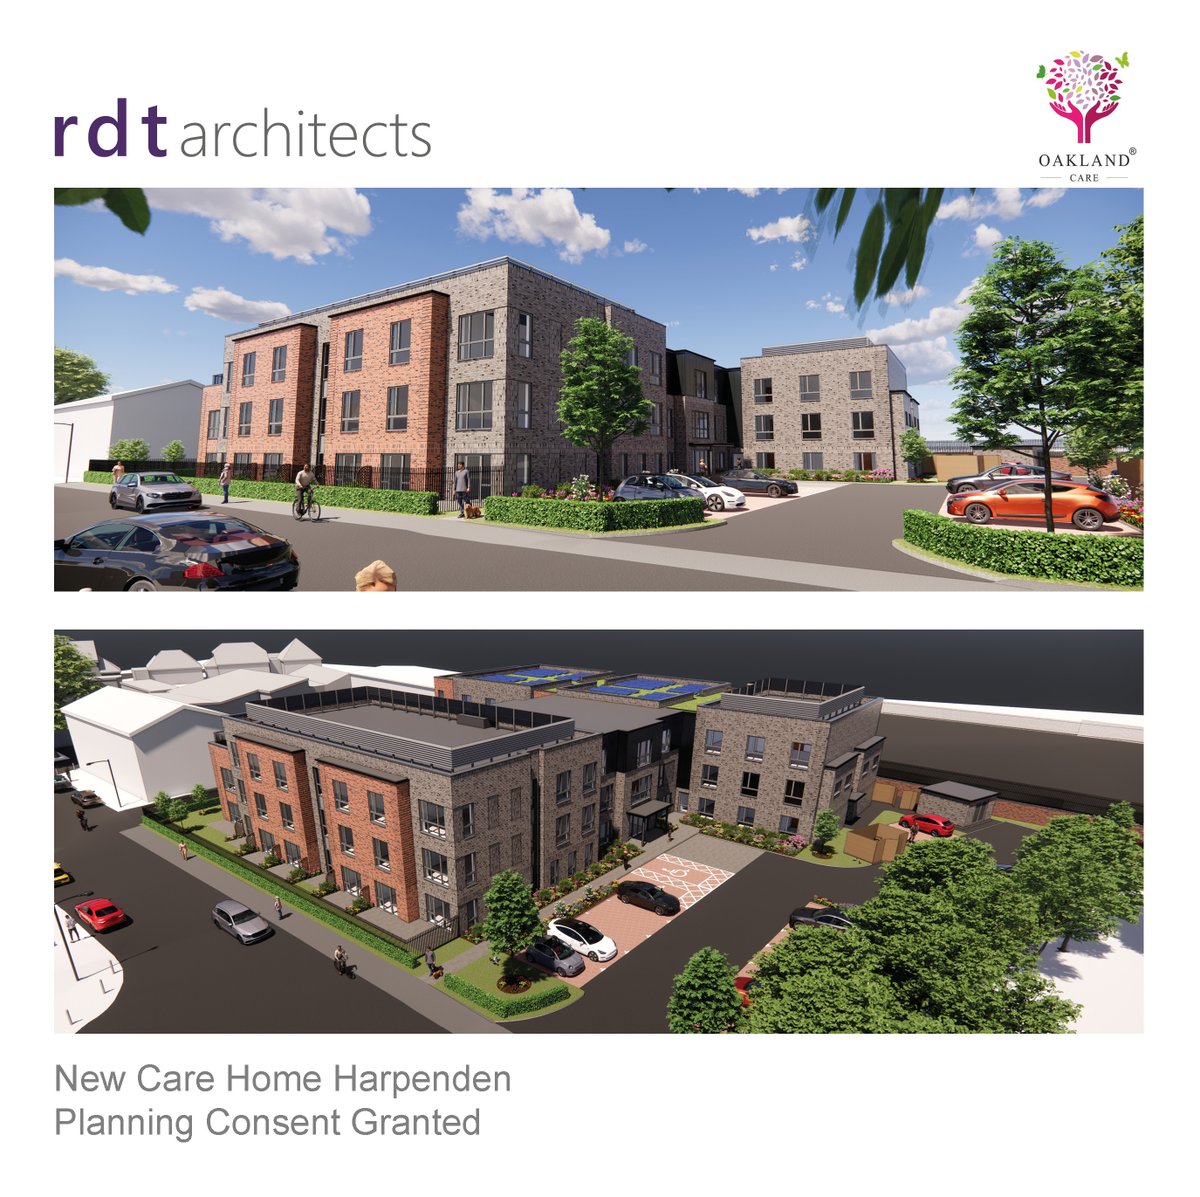 Great news! Planning consent granted for 75-bed Harpenden care home Having received #planning permission for 39 apartments on this site for @JarvisHomes, @OaklandCare appointed RDT to submit a care home design to serve the local community #riba #architects #carehome #design #bim